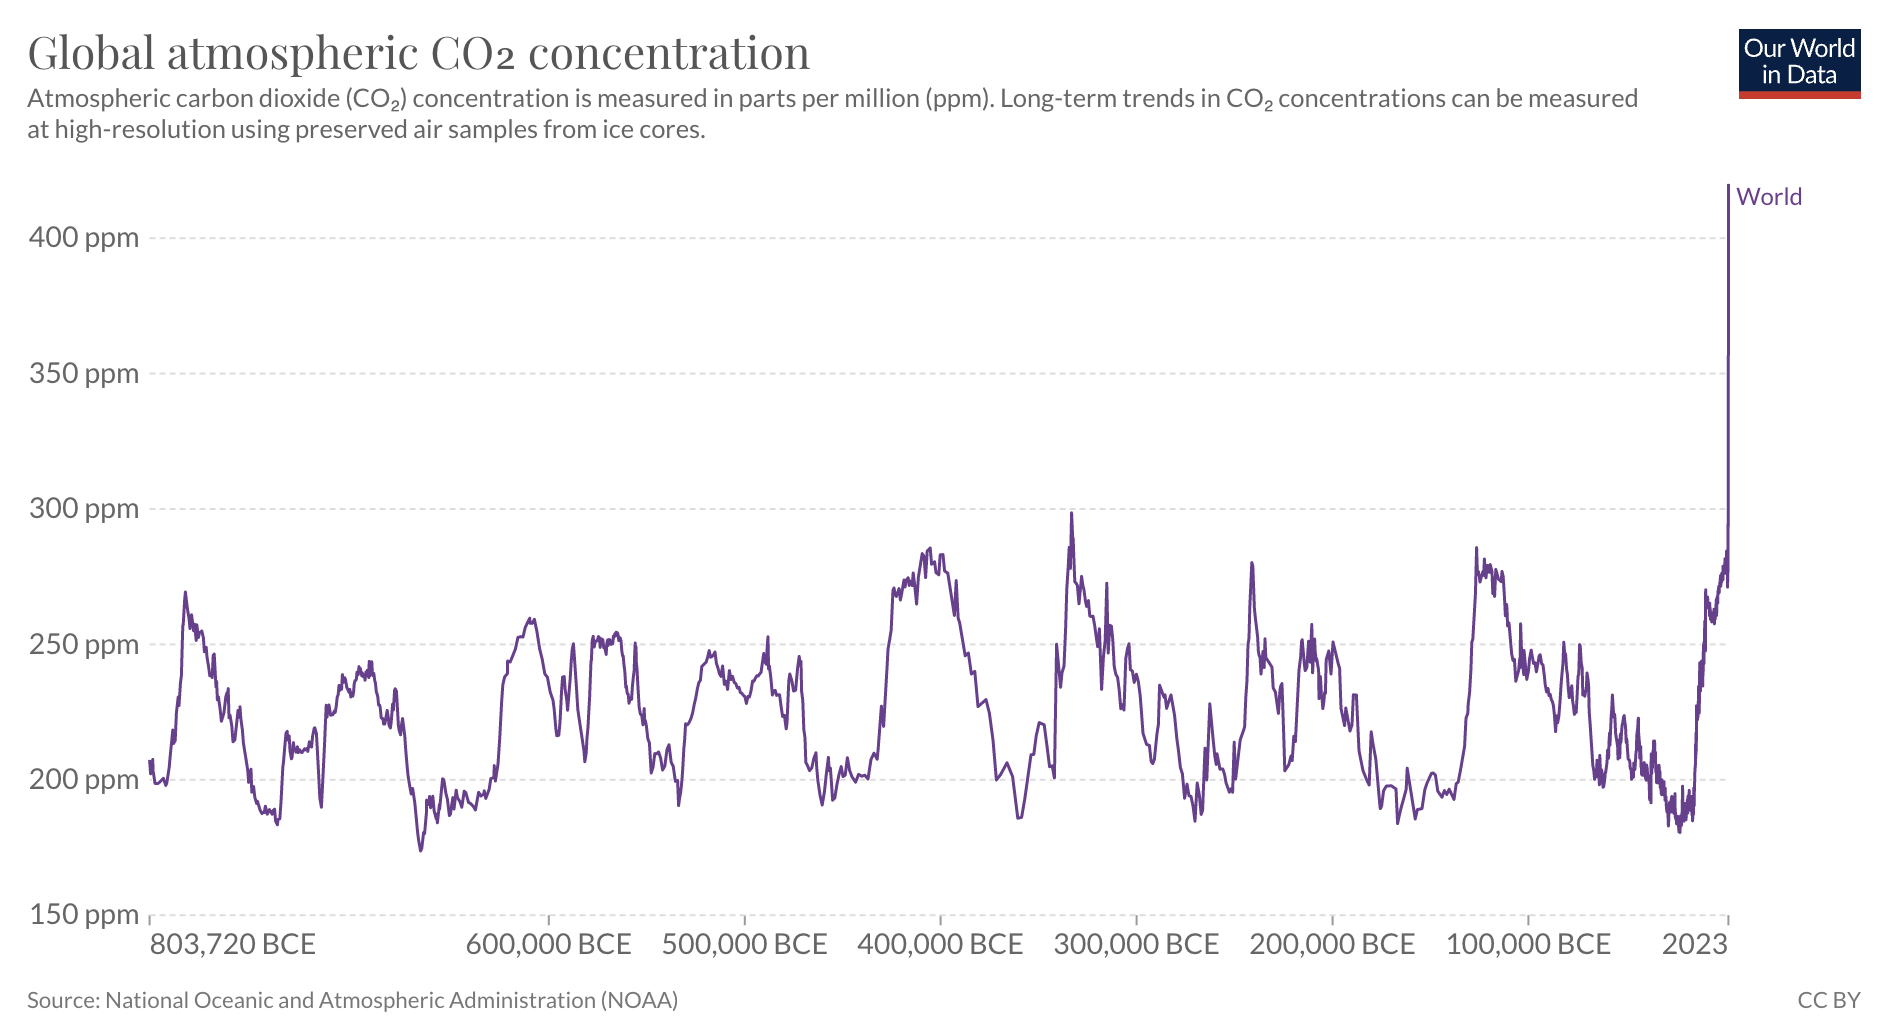 World atmospheric CO2 concentration in parts per million, starting at 200 ppm in 803,720 BCE and fluctuating to 300 ppm at regular intervals until recent history, when it increases to 400 ppm